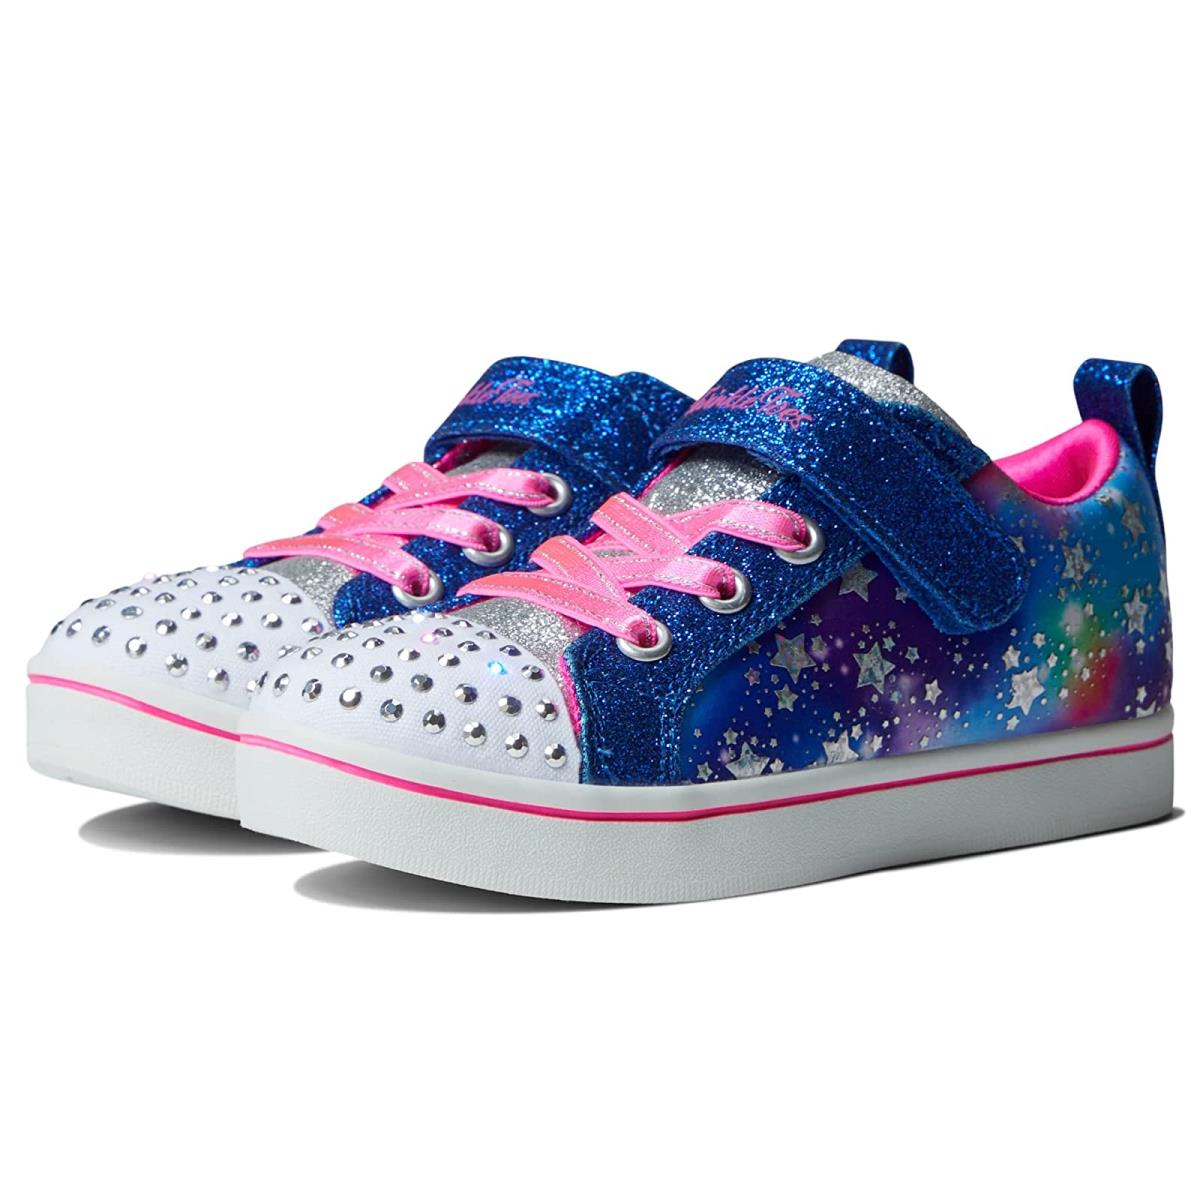 Girl`s Shoes Skechers Kids Twinkle Toes - Sparkle Rayz 314836N Toddler Blue/Multi